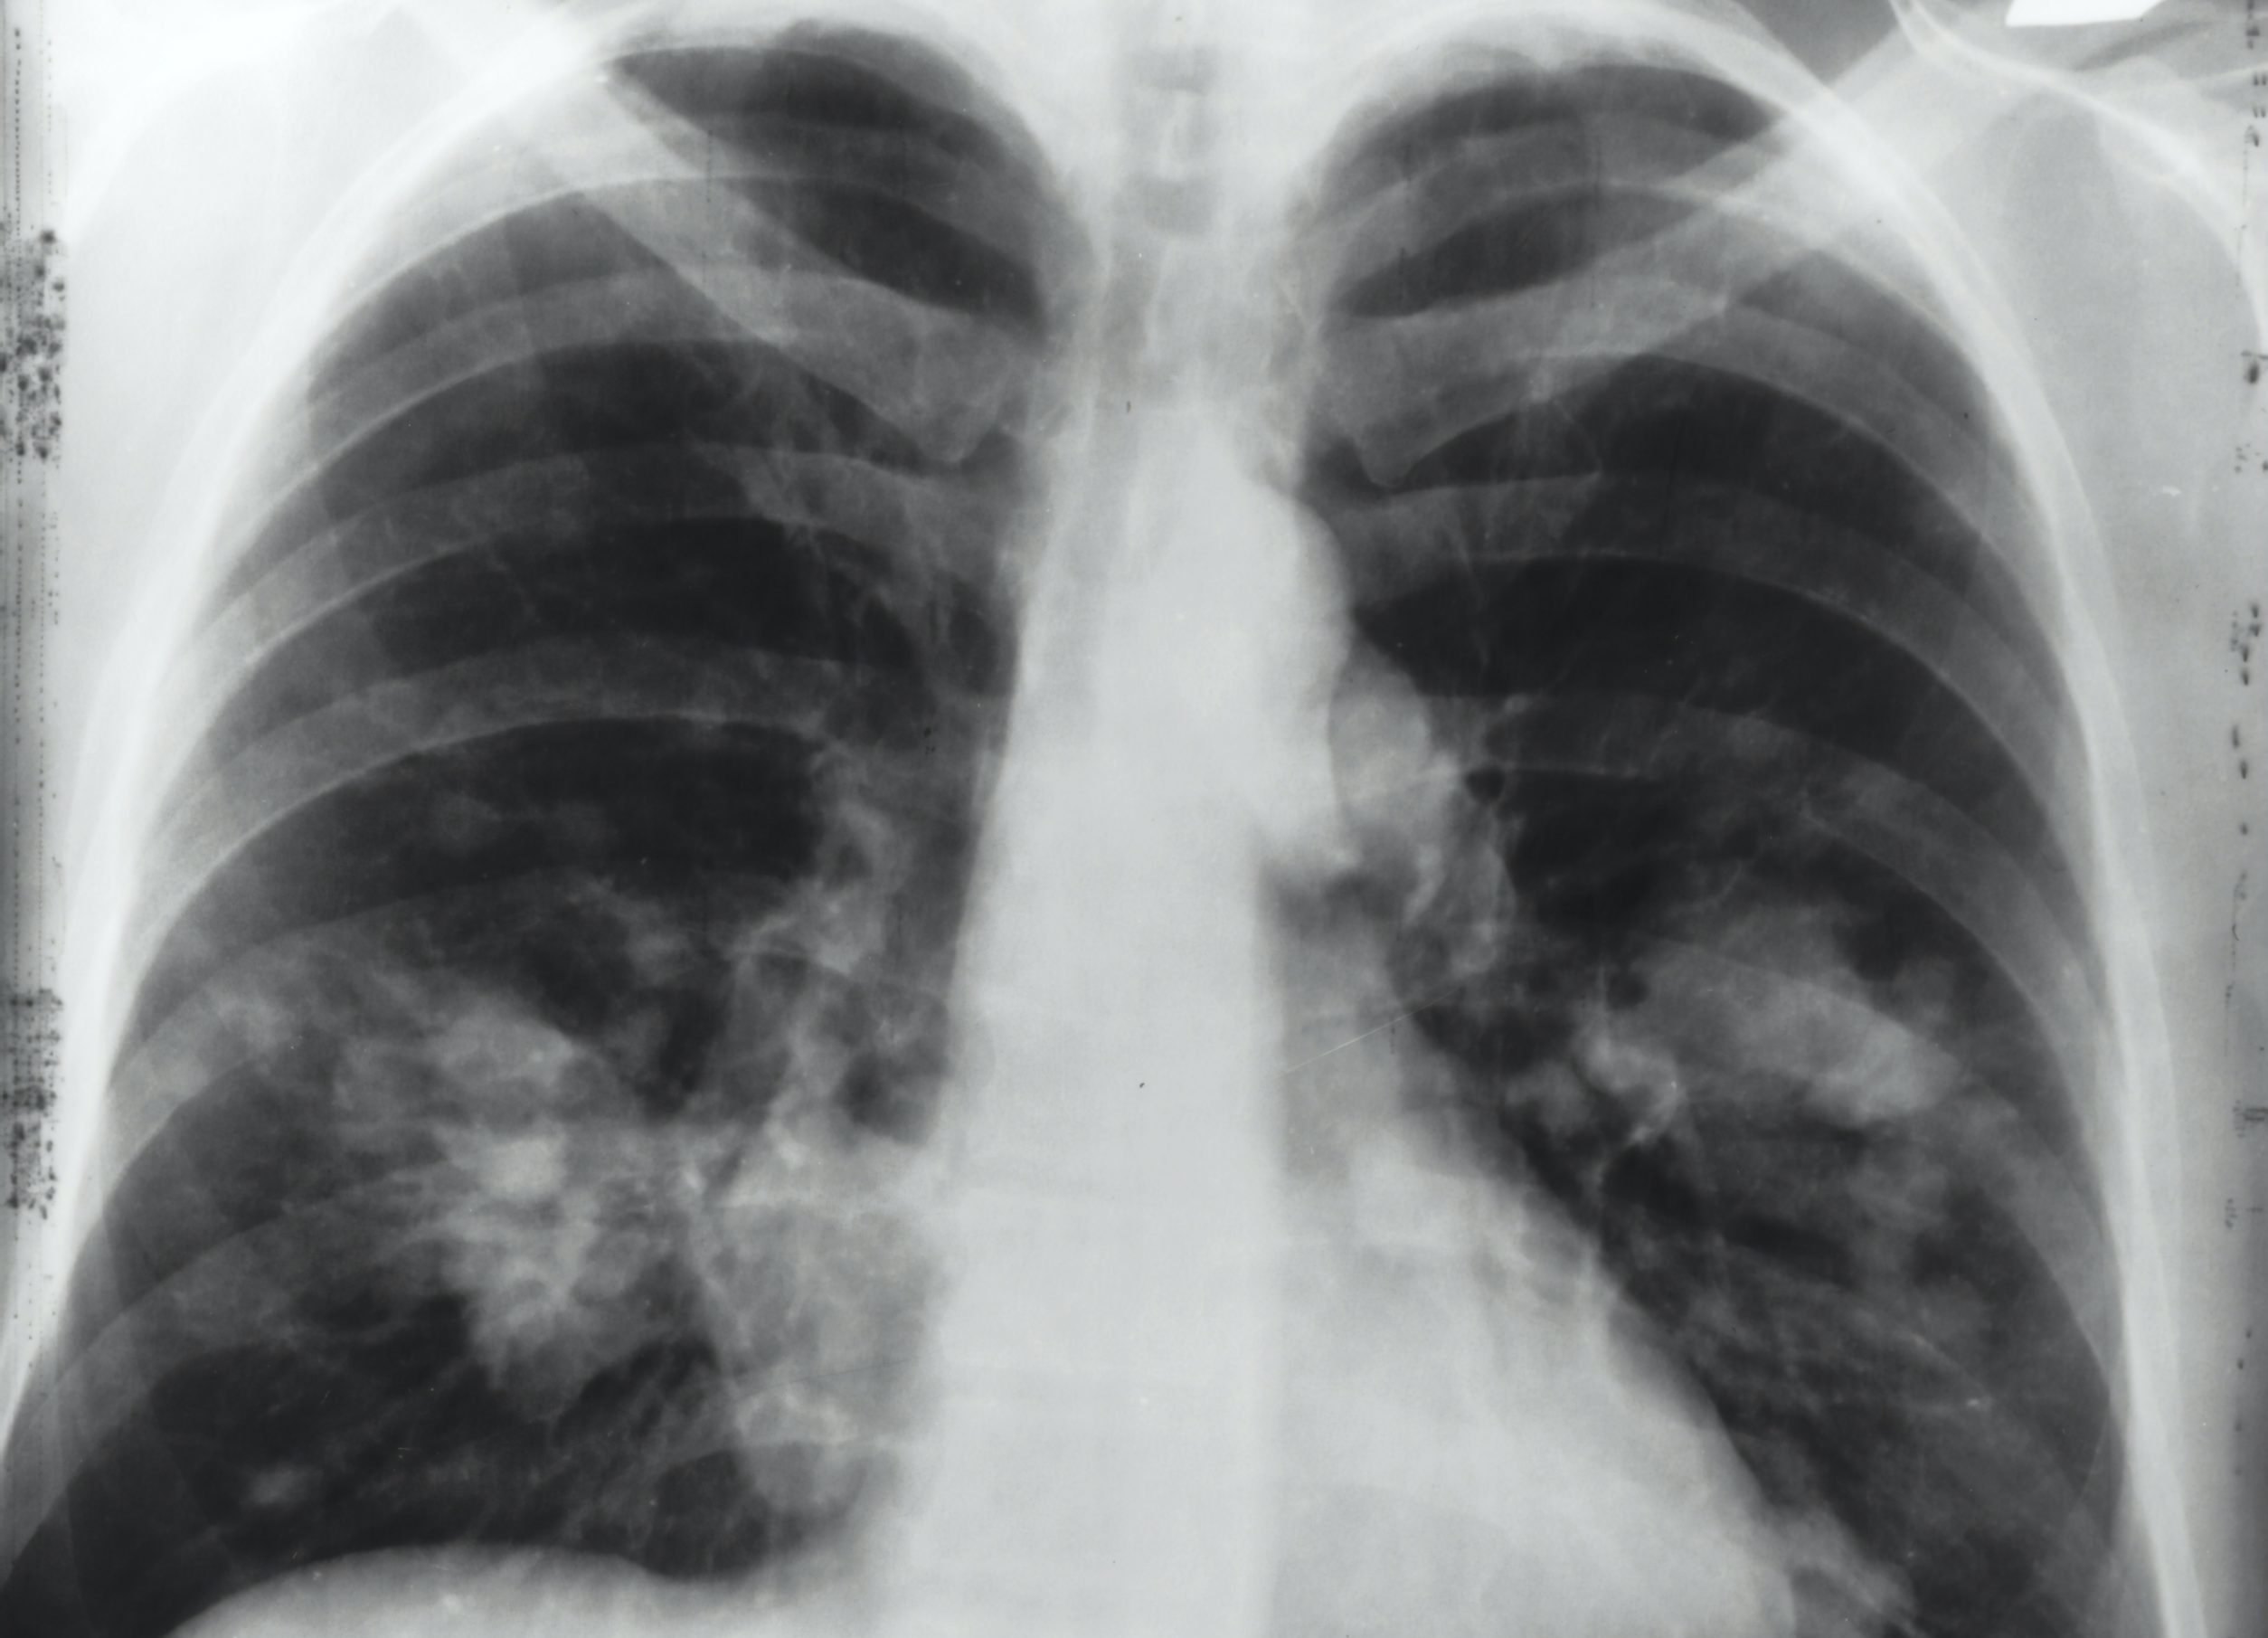 Global Study Finds Asbestos to Be Leading Cause of Lung Cancer in the Workplace